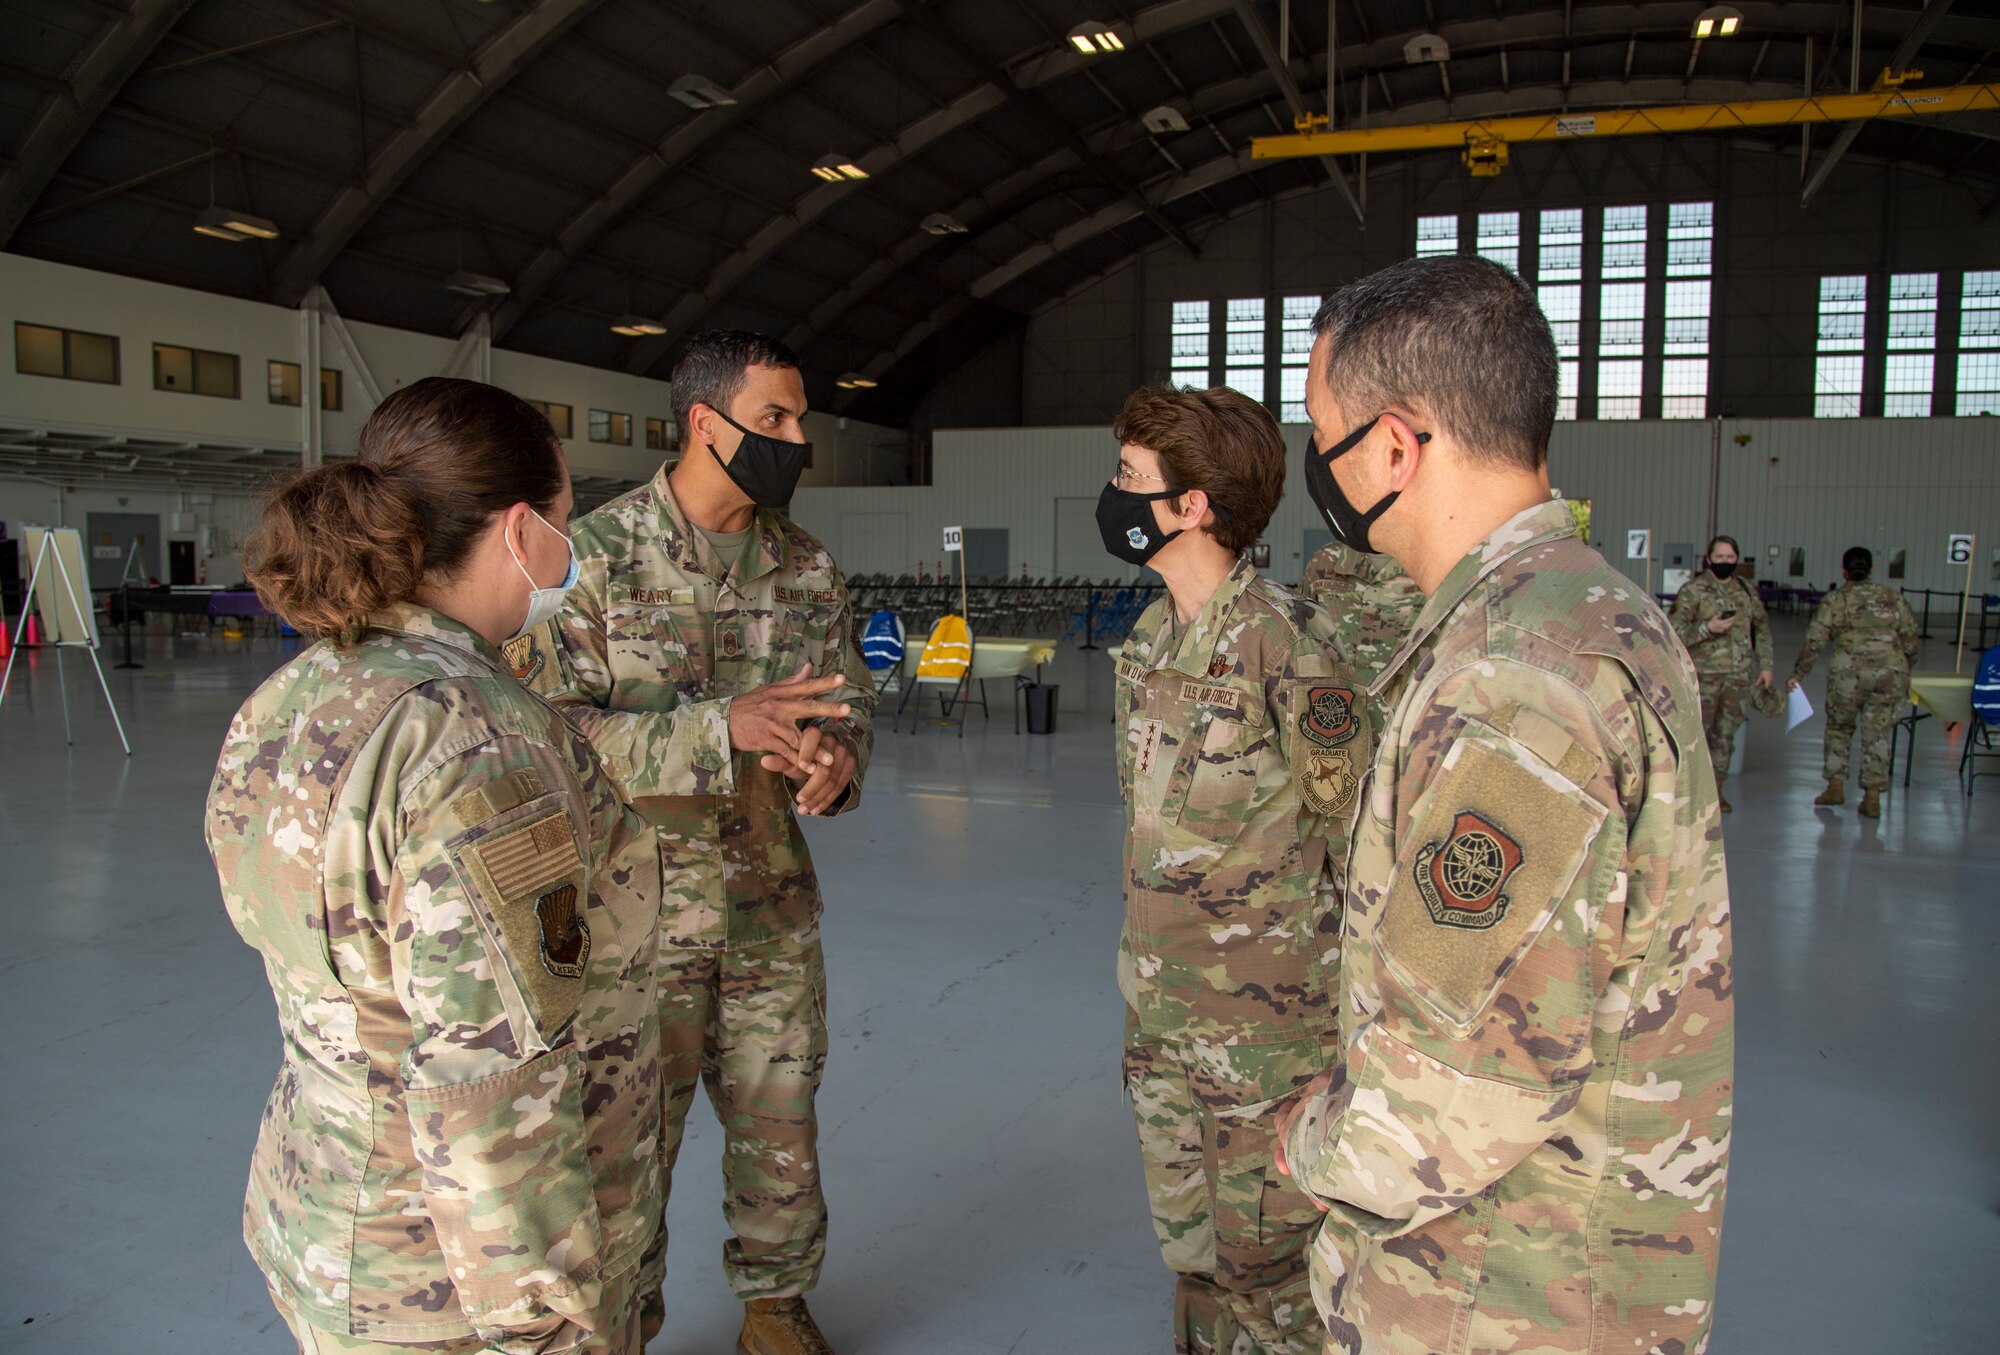 Air Mobility Command (AMC) Commander, Gen. Jaqueline Van Ovost, and AMC Command Chief, Chief Master Sgt. Brian Kruzelnick, speak to Airmen from the 6th Medical Group during their visit to MacDill Air Force Base, Fla., April 28, 2021.